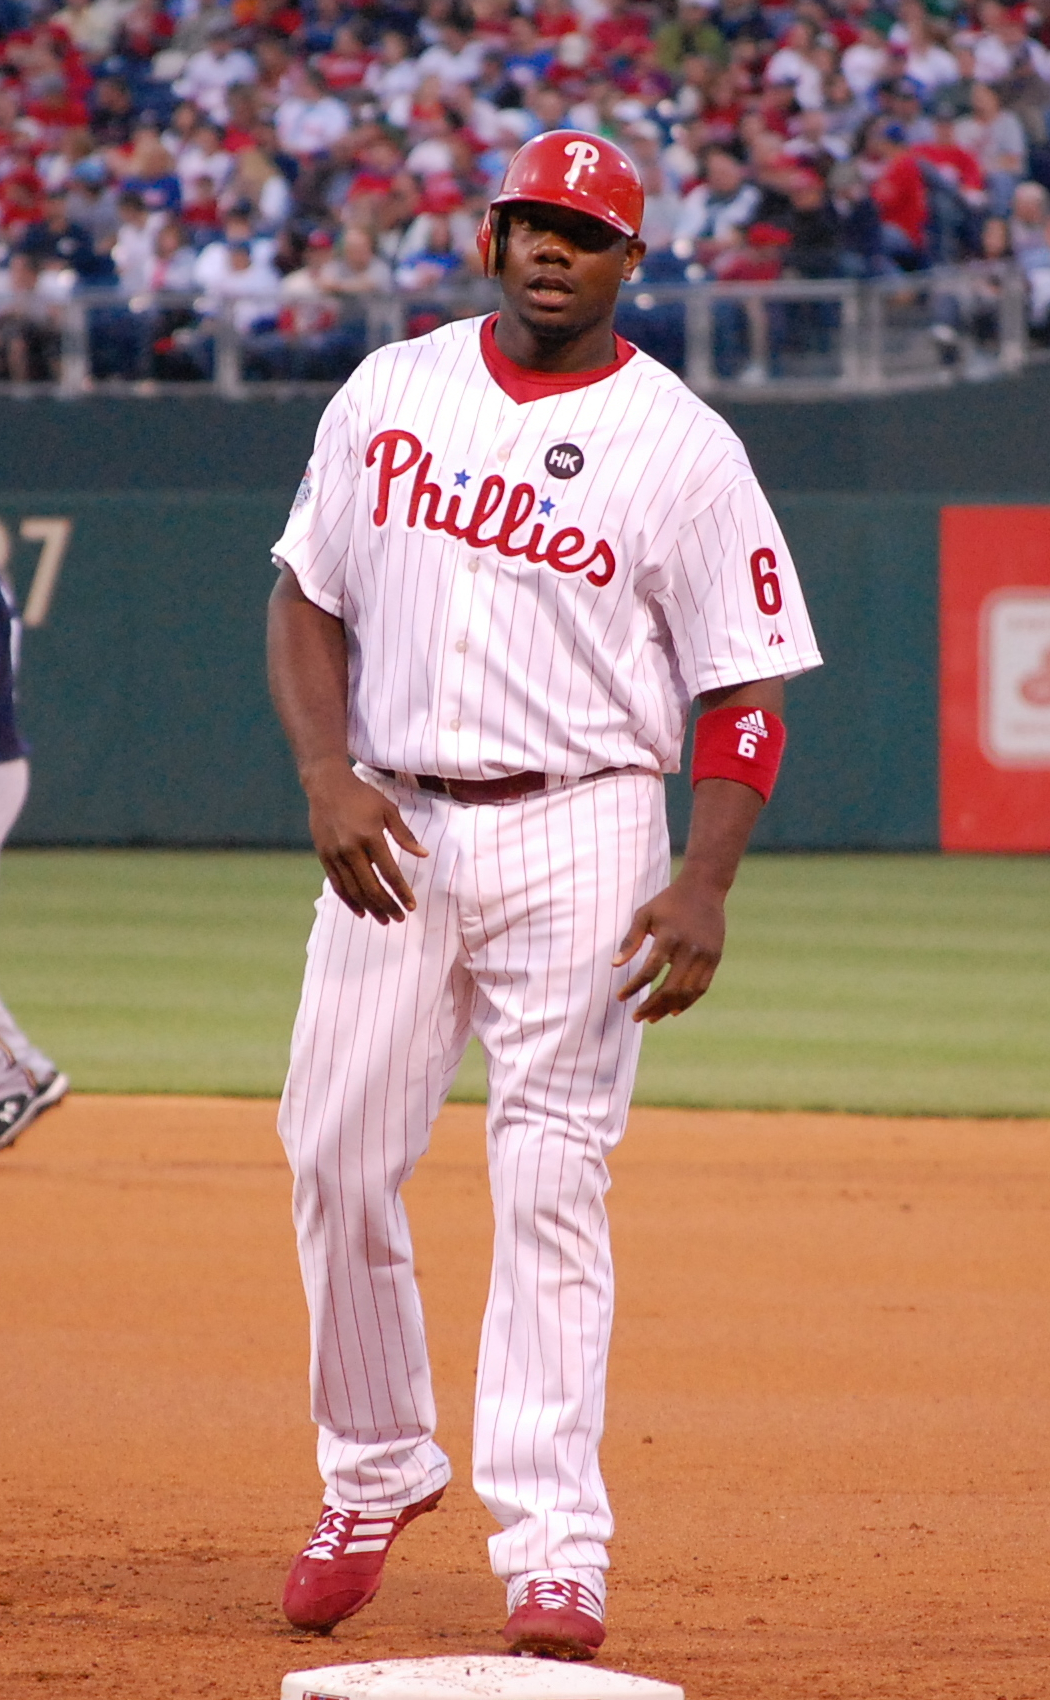 "Ryan Howard 2009" by L-Rey on Picasa Web Albums (Original version)UCinternational (Crop) - Originally posted to Picasa Web Albums as "Phillies vs Brewers 4/21/2009"Cropped by UCinternational. Licensed under CC BY 3.0 via Commons.
